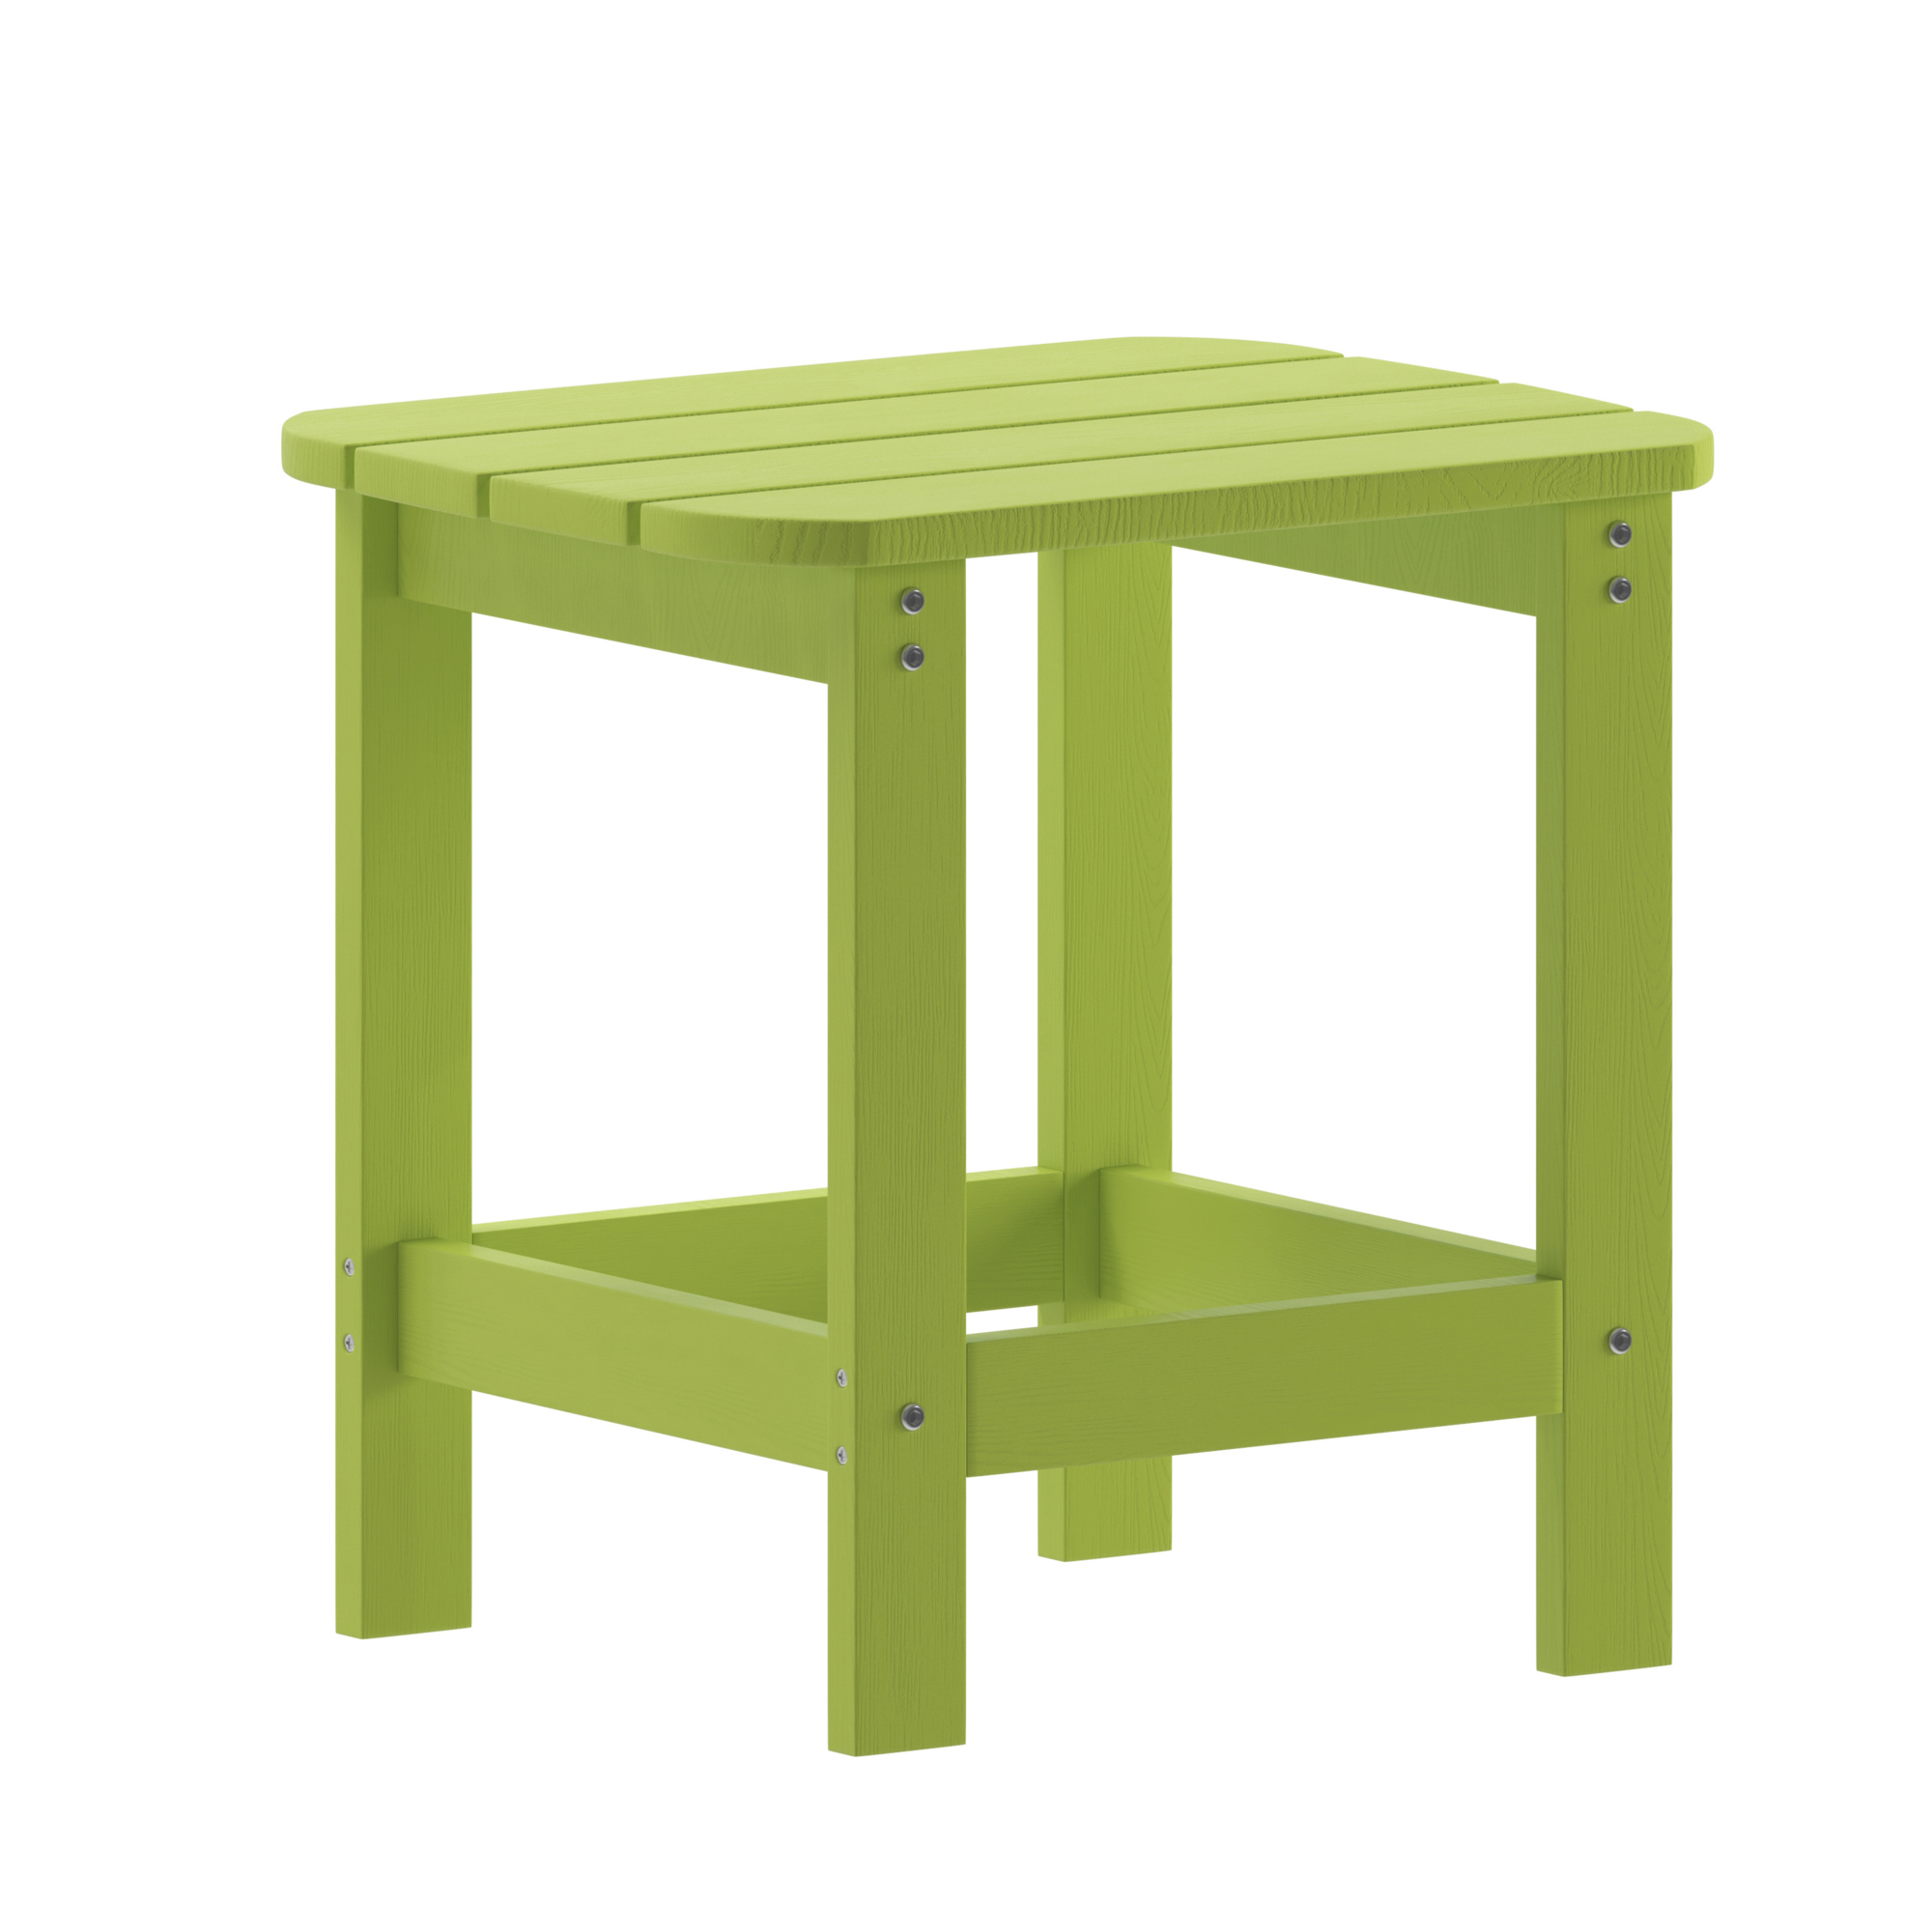 Flash Furniture, Lime All-Weather Adirondack Side Table, Table Shape Rectangle, Primary Color Green, Height 18.25 in, Model JJT14001LM